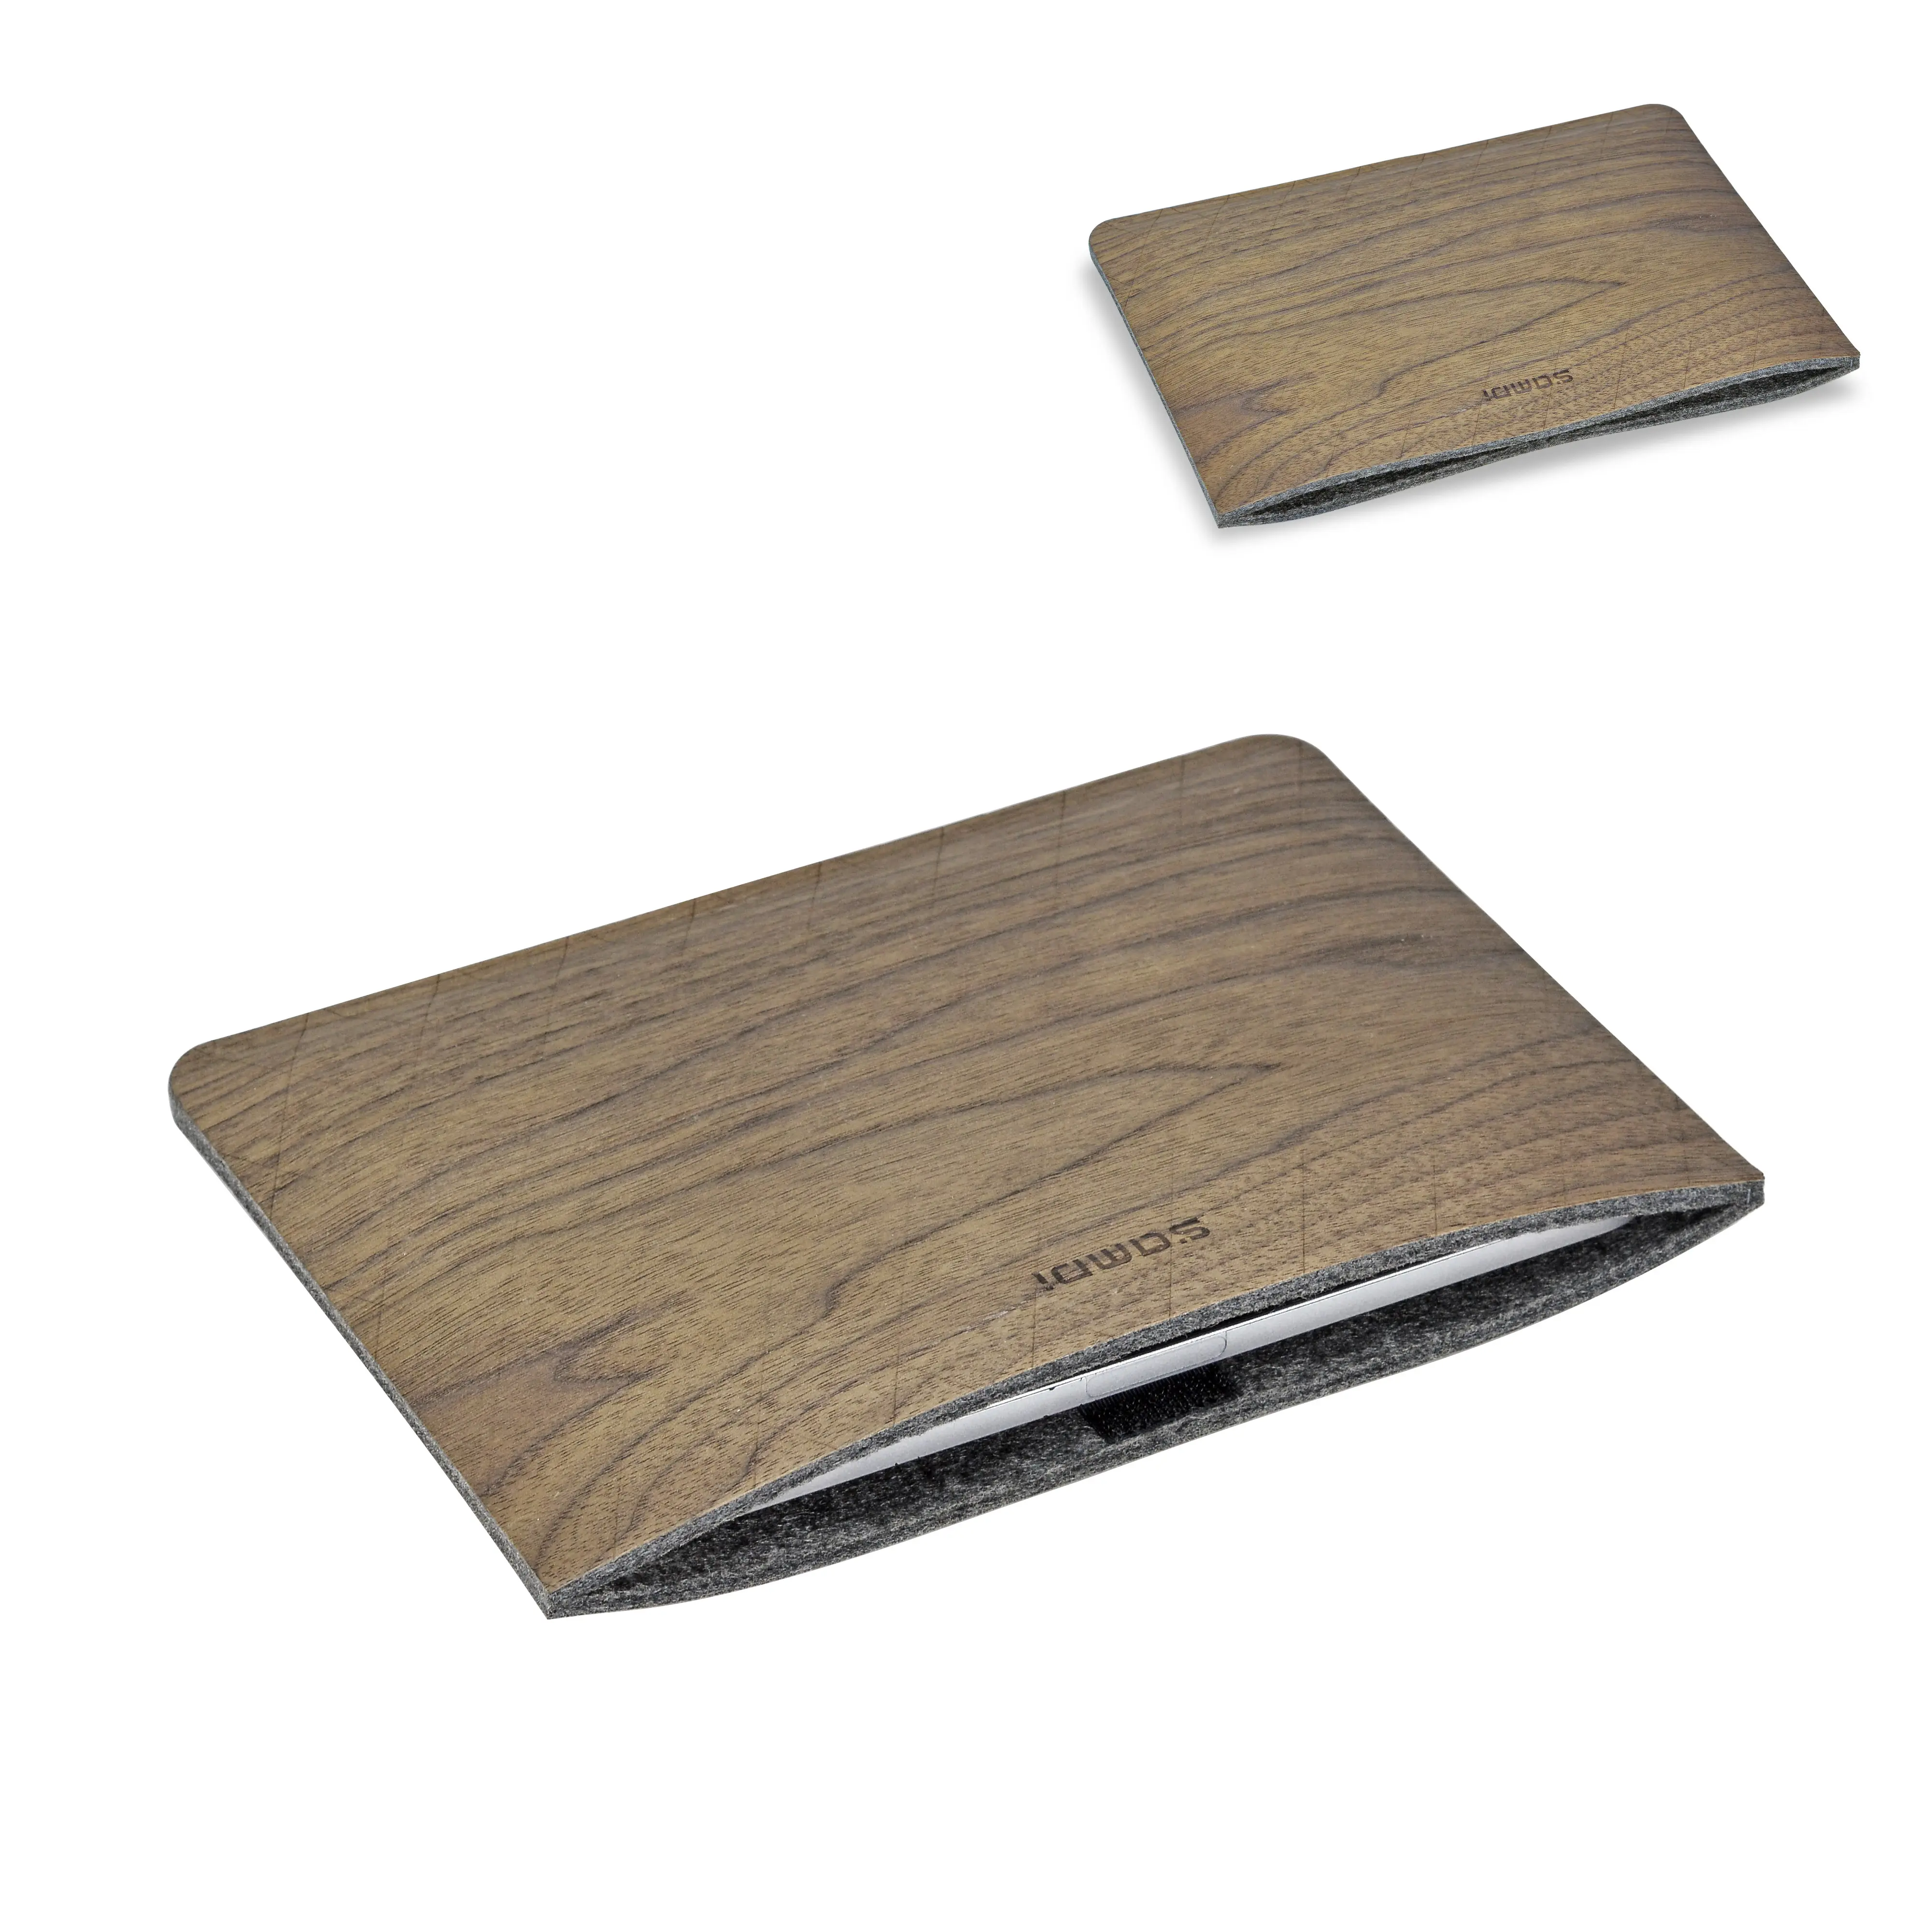 Samdi High Quality Wood Veneer Protective Case Suitable For Laptop Walnut Maple